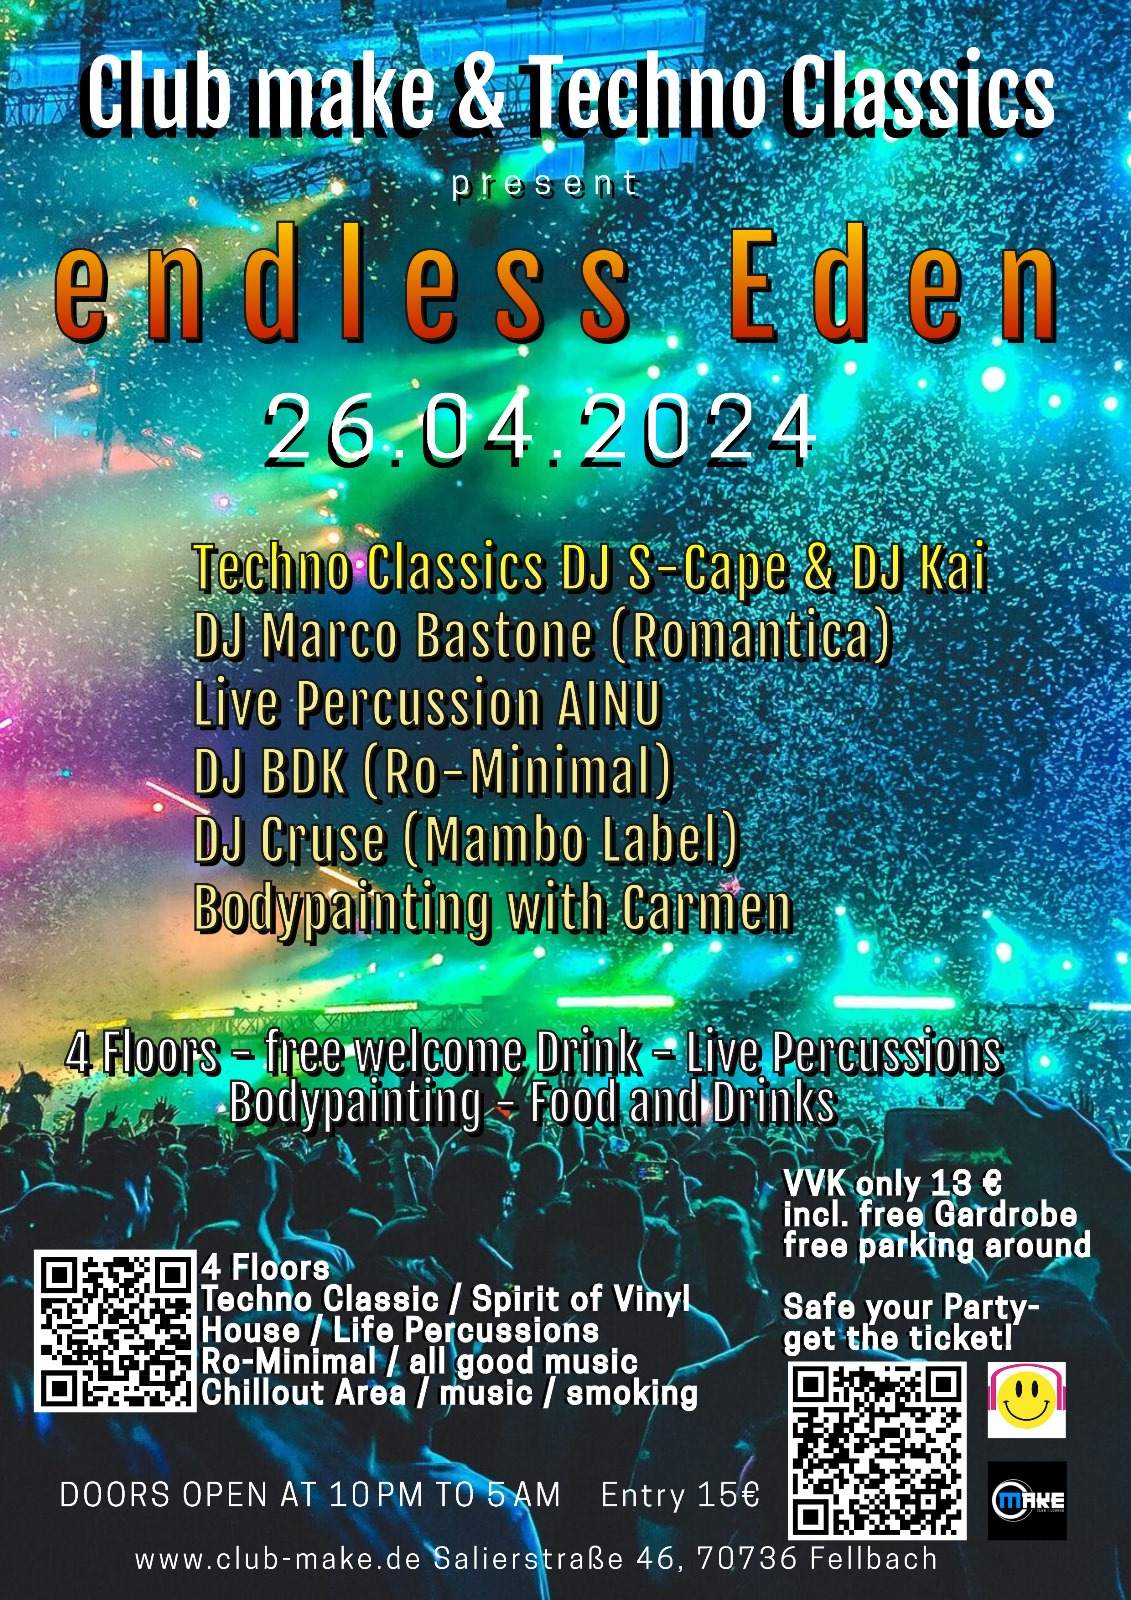 endless Eden - EDM Classic Trance Techno, House with Live Percussion AINU - Página frontal